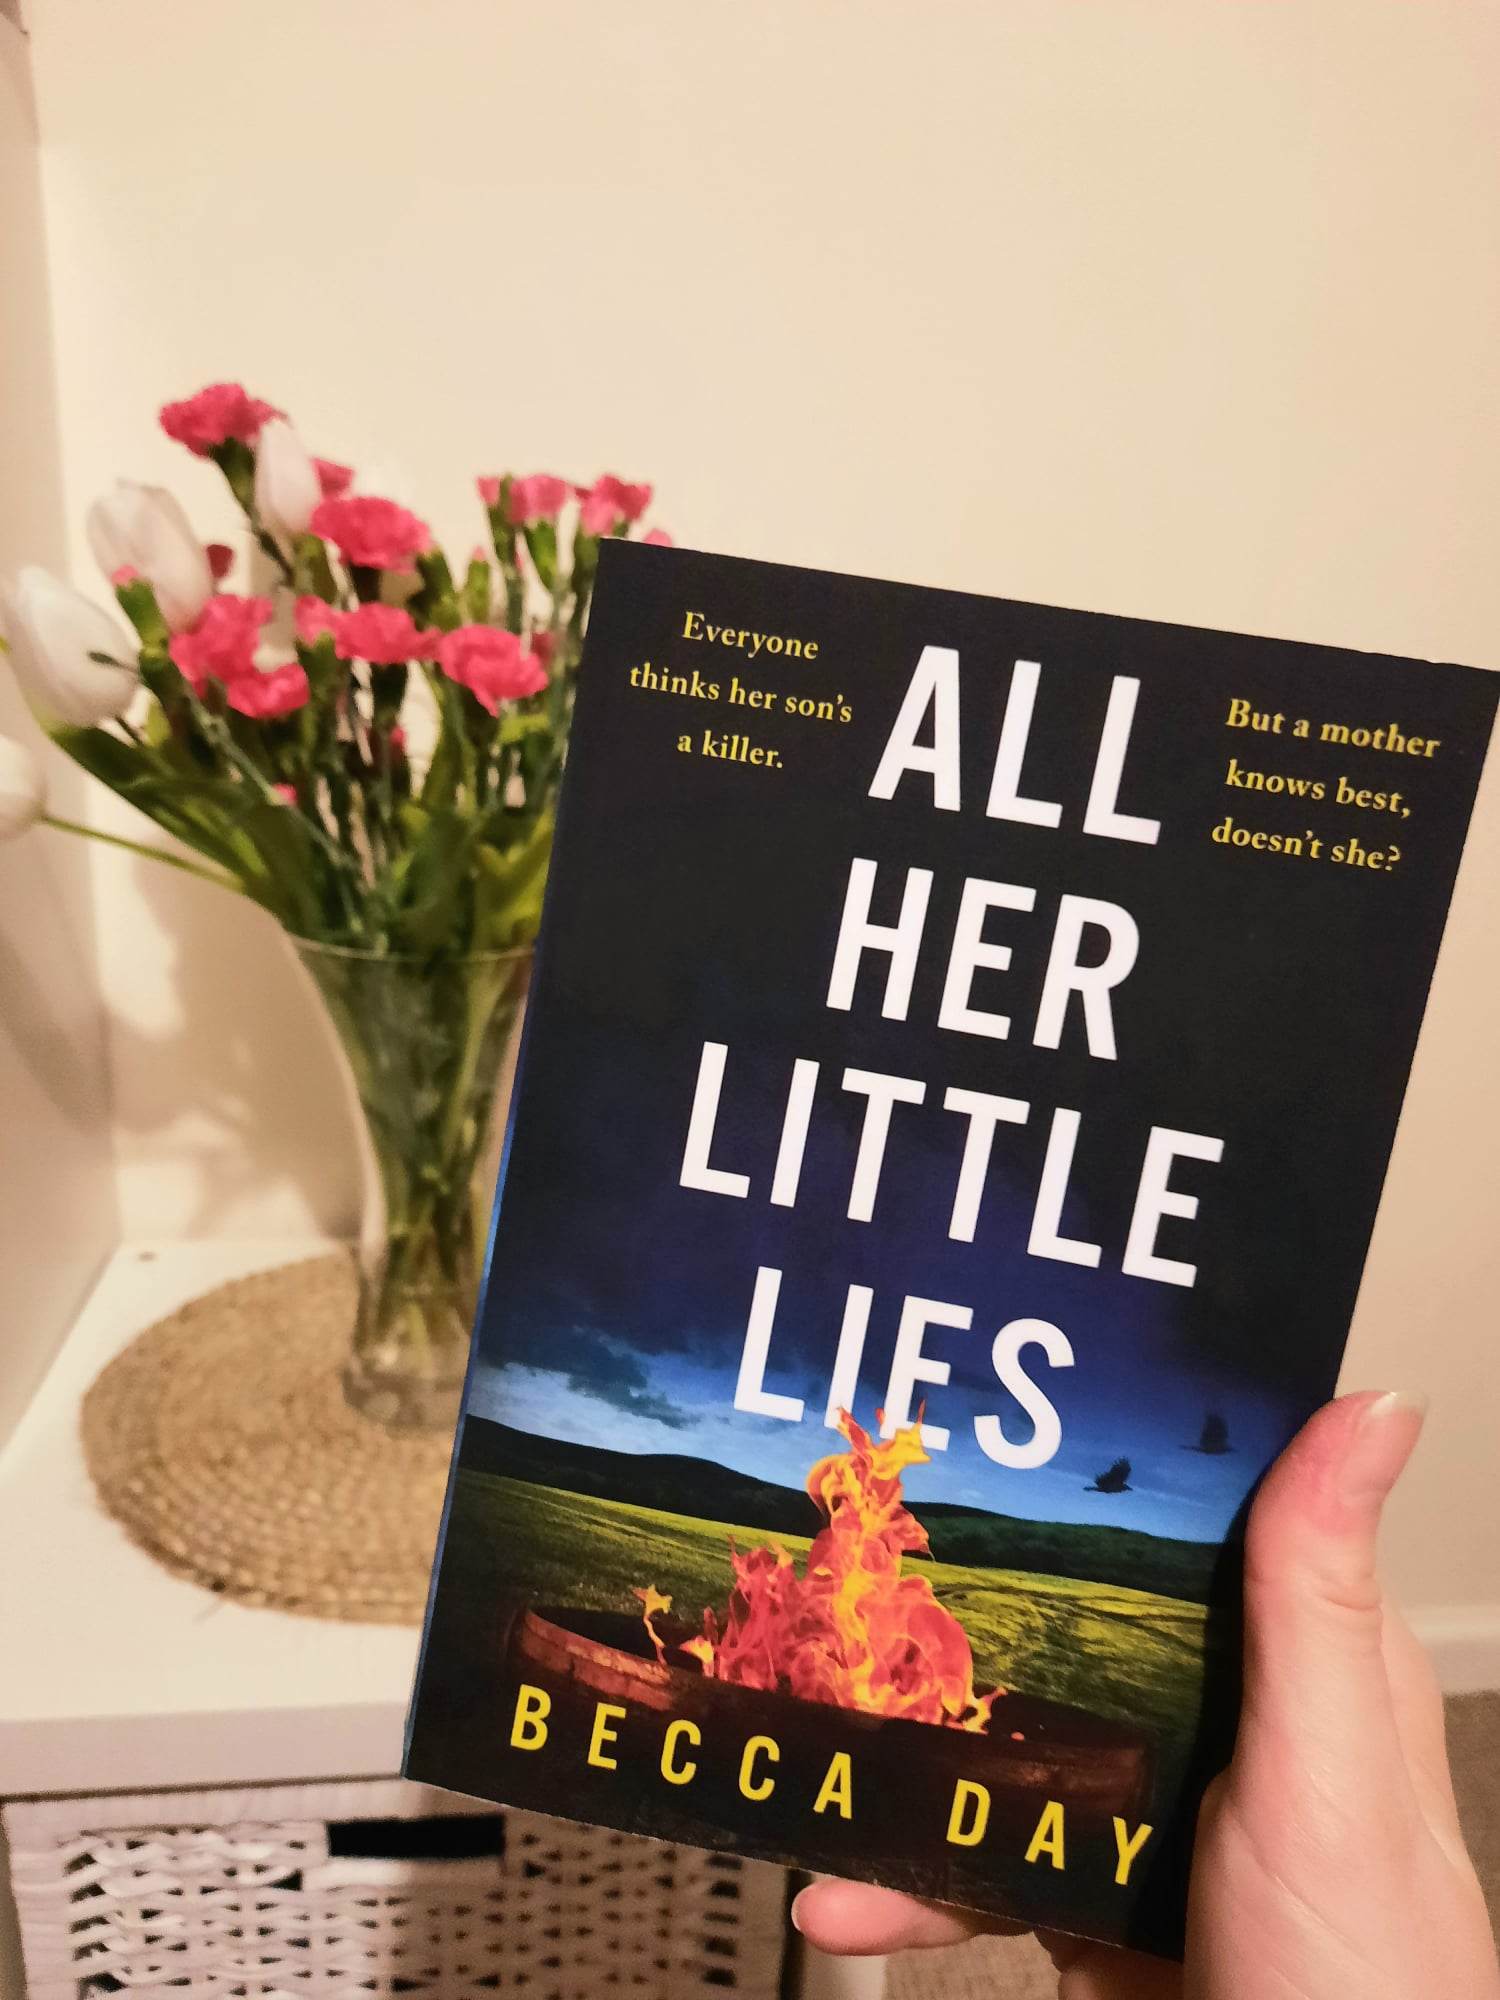 All Her Little Lies book by Becca Day